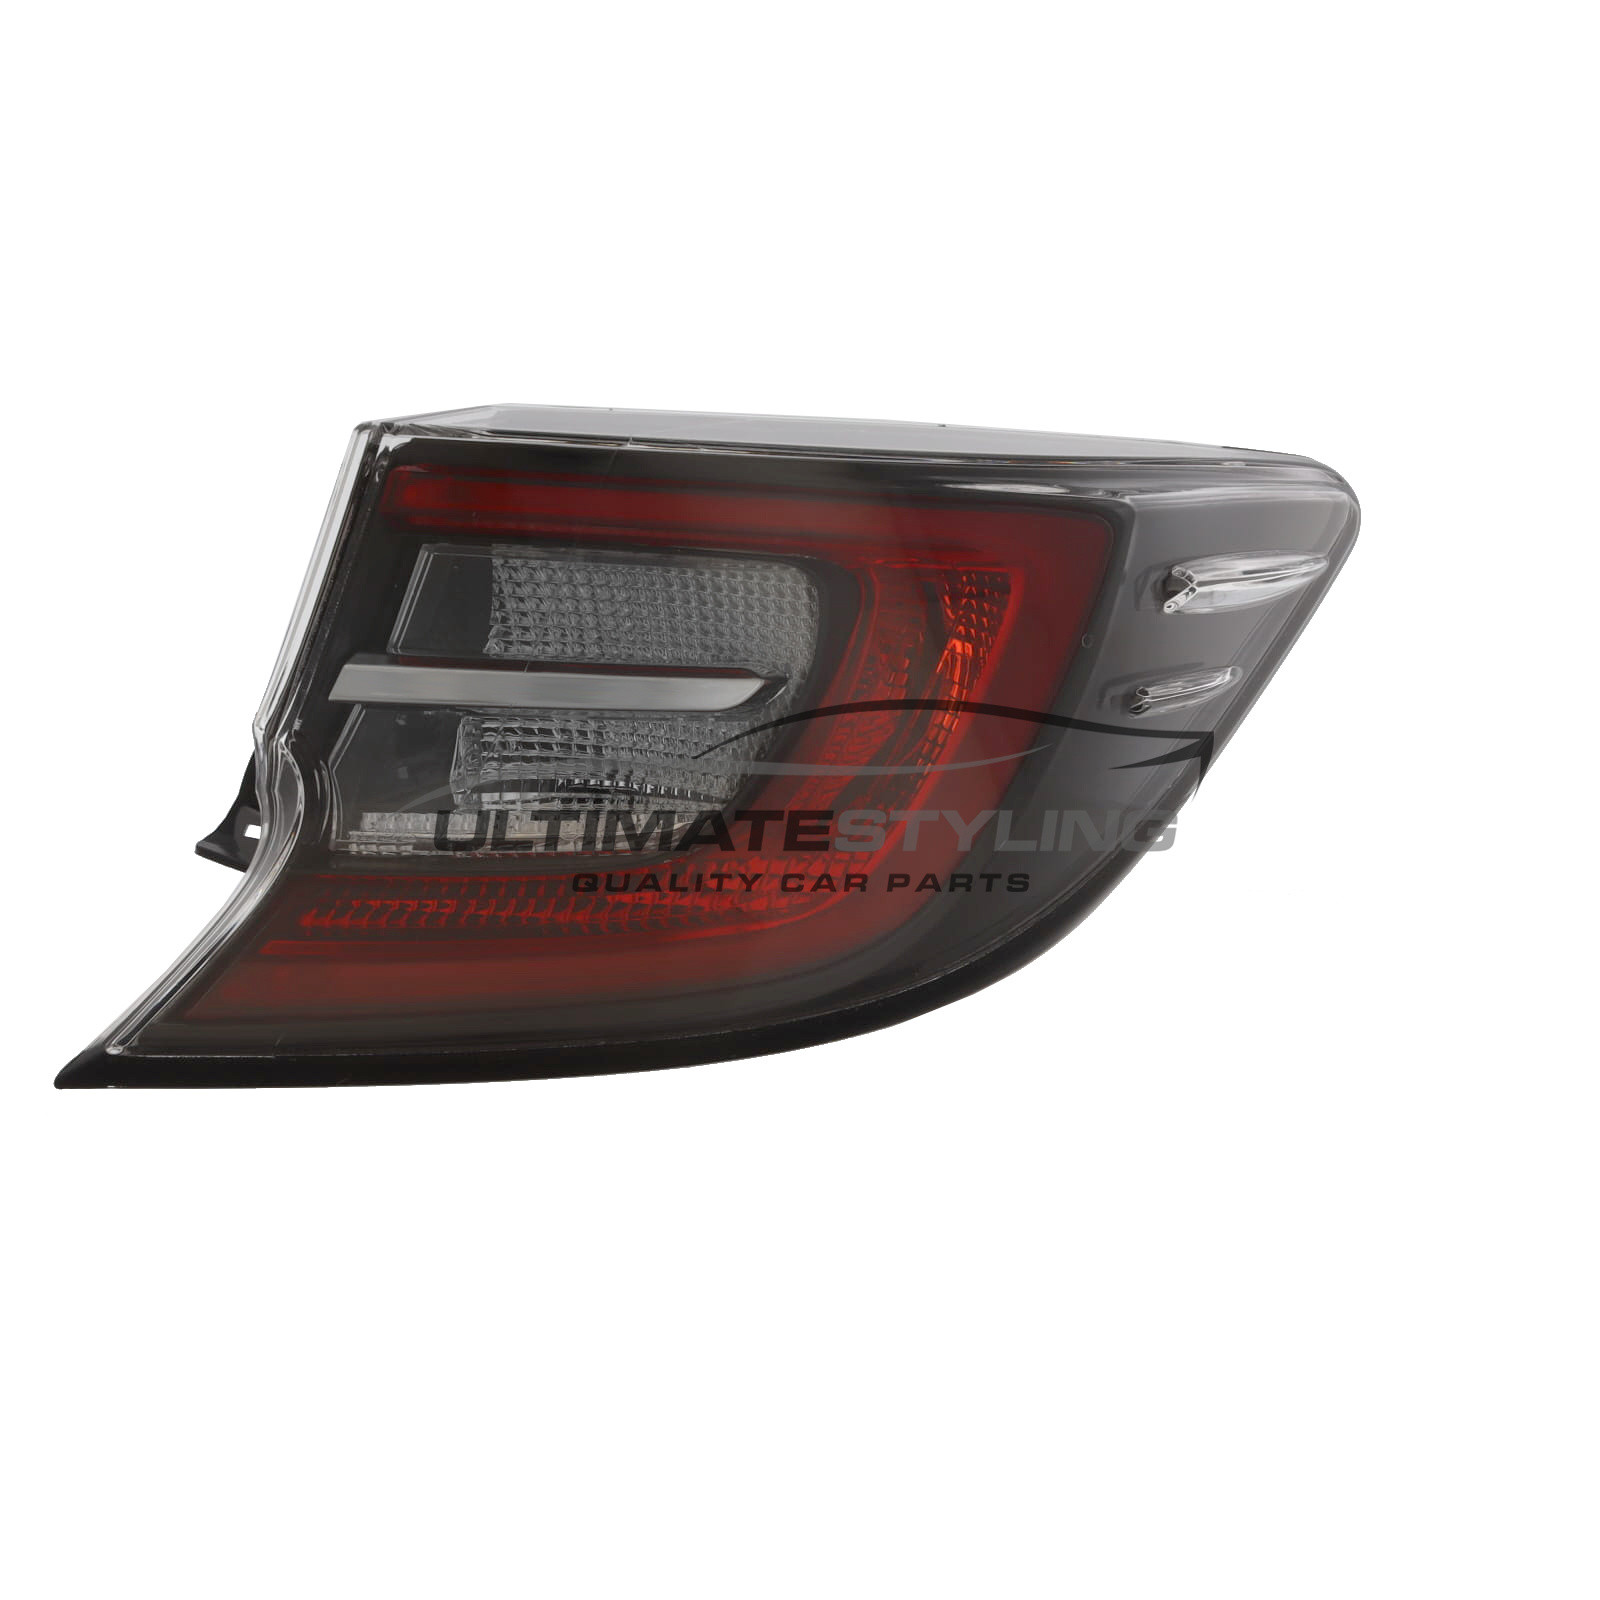 Toyota Corolla Rear Light / Tail Light - Drivers Side (RH), Rear Outer (Wing) - LED